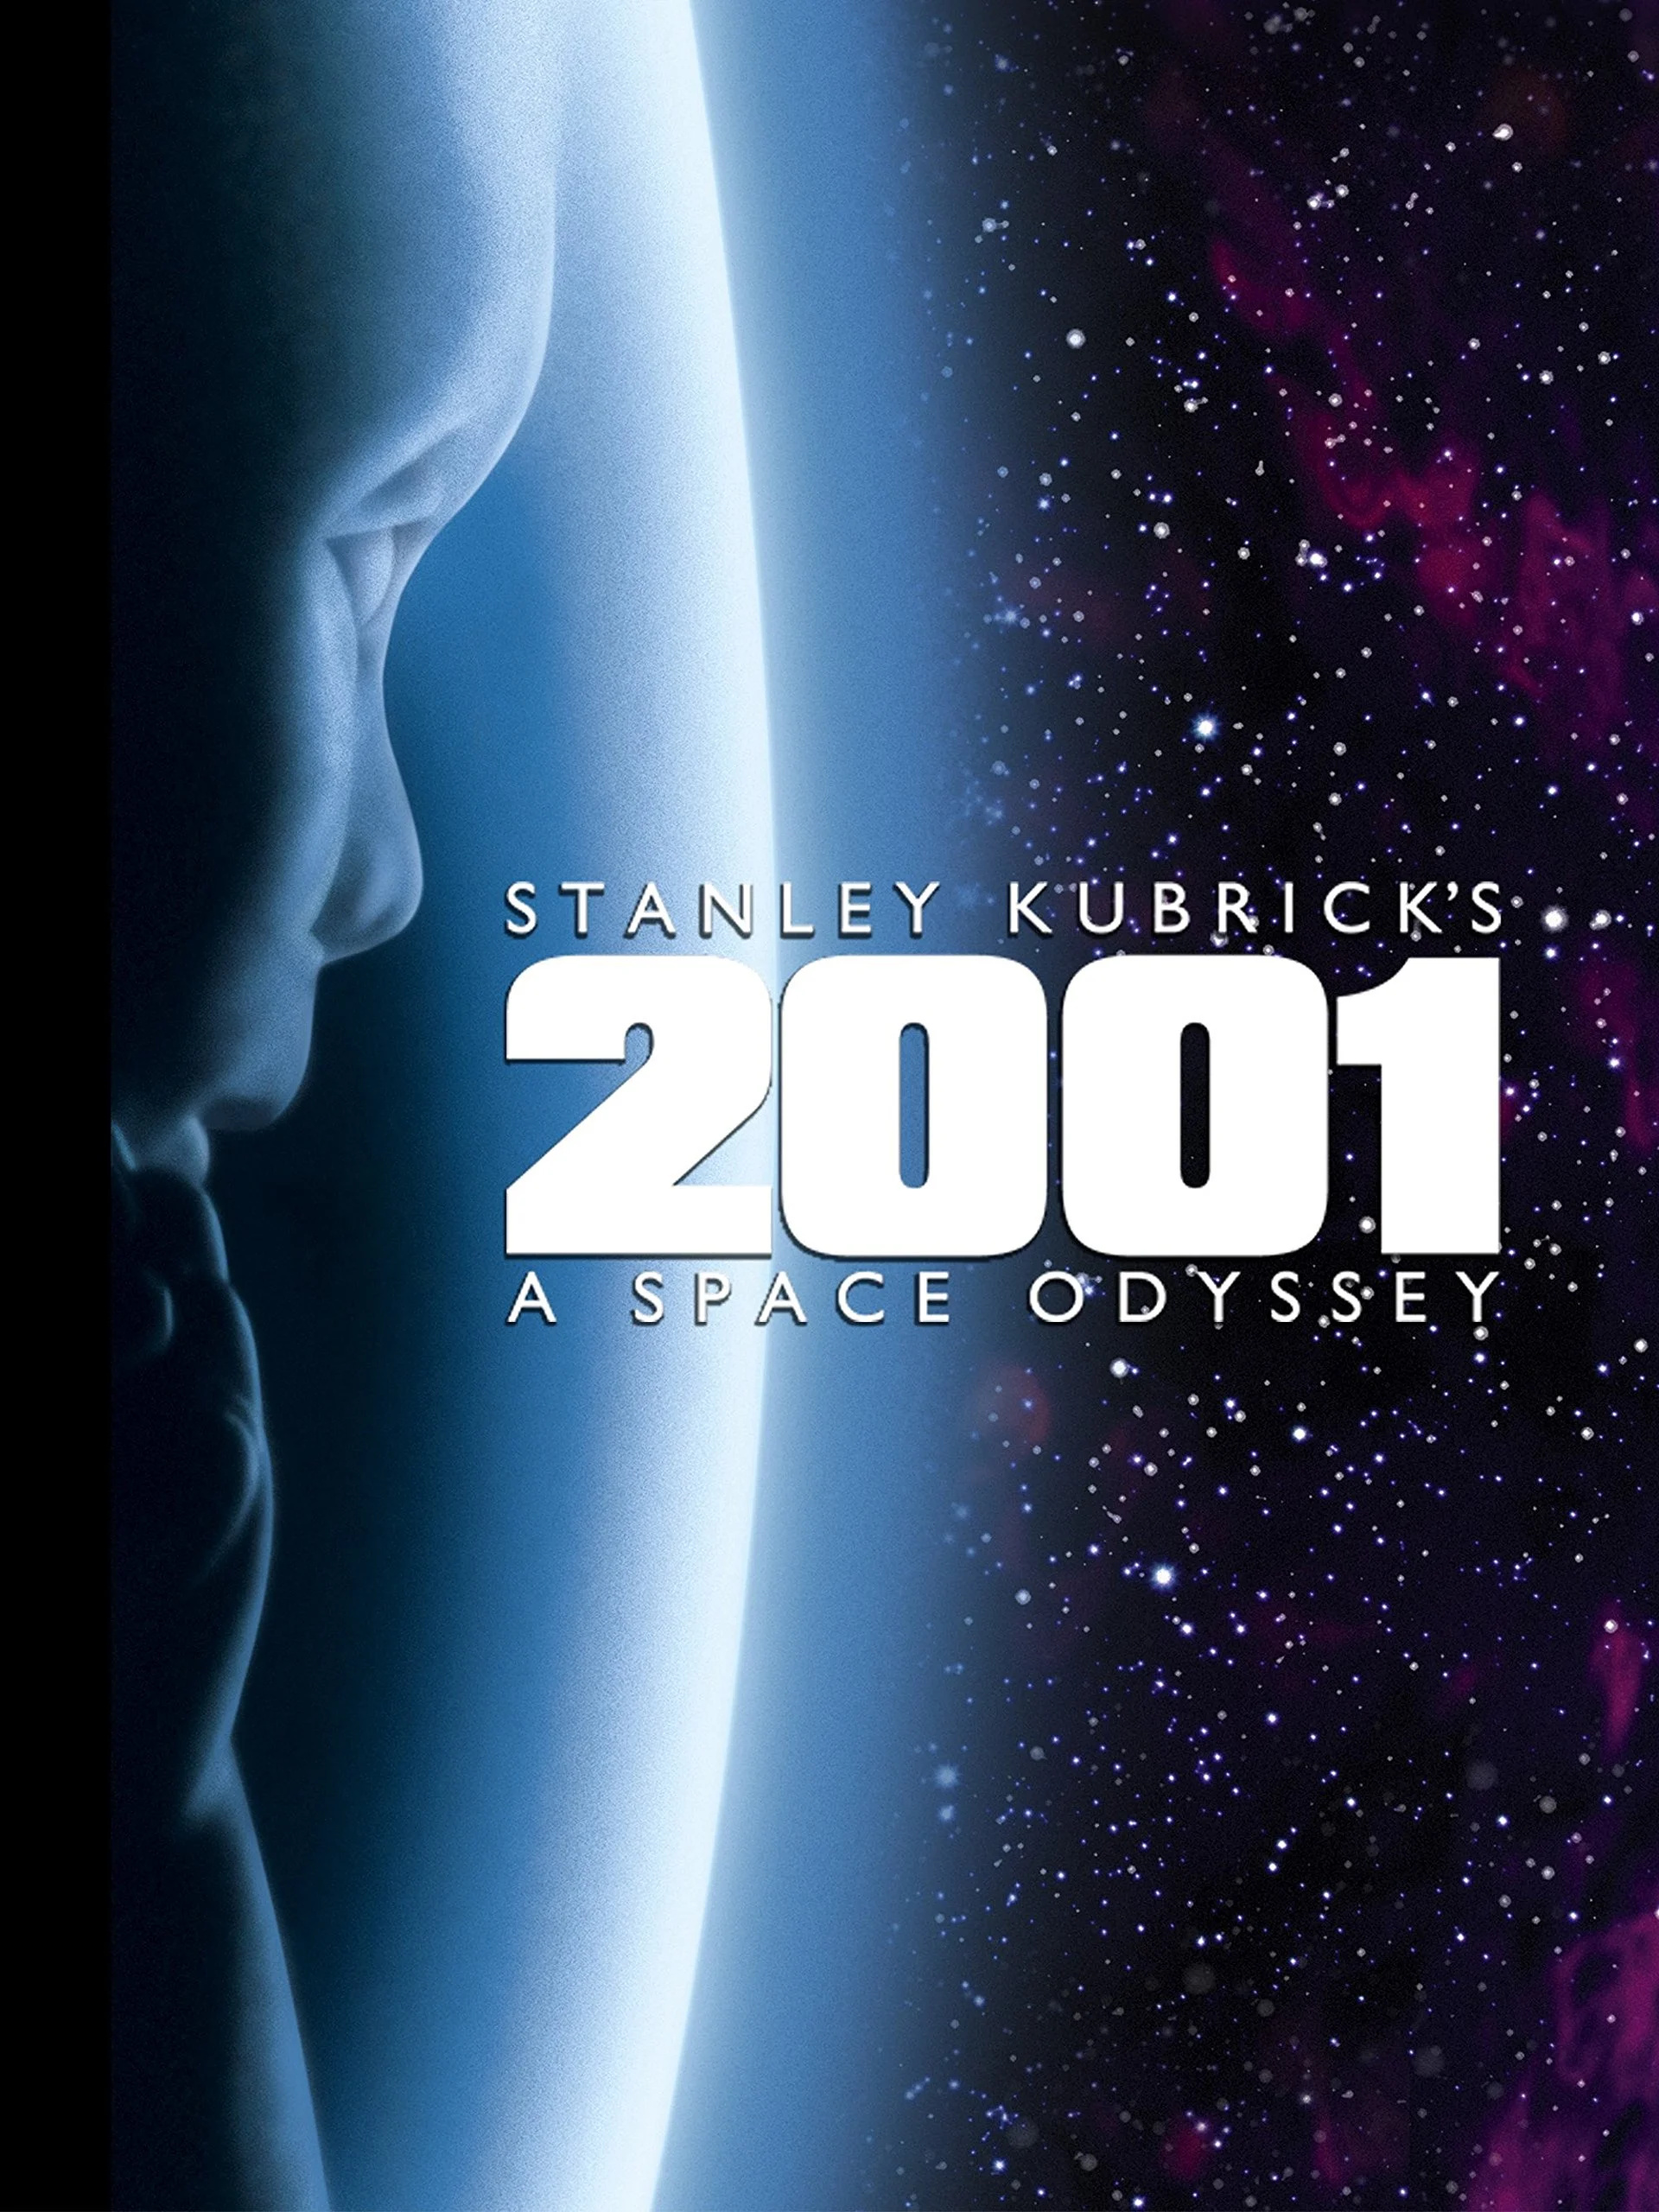 Space Odyssey review, Kubrick's DVD, Warner release, Home video edition, Film critique, 1920x2560 HD Handy